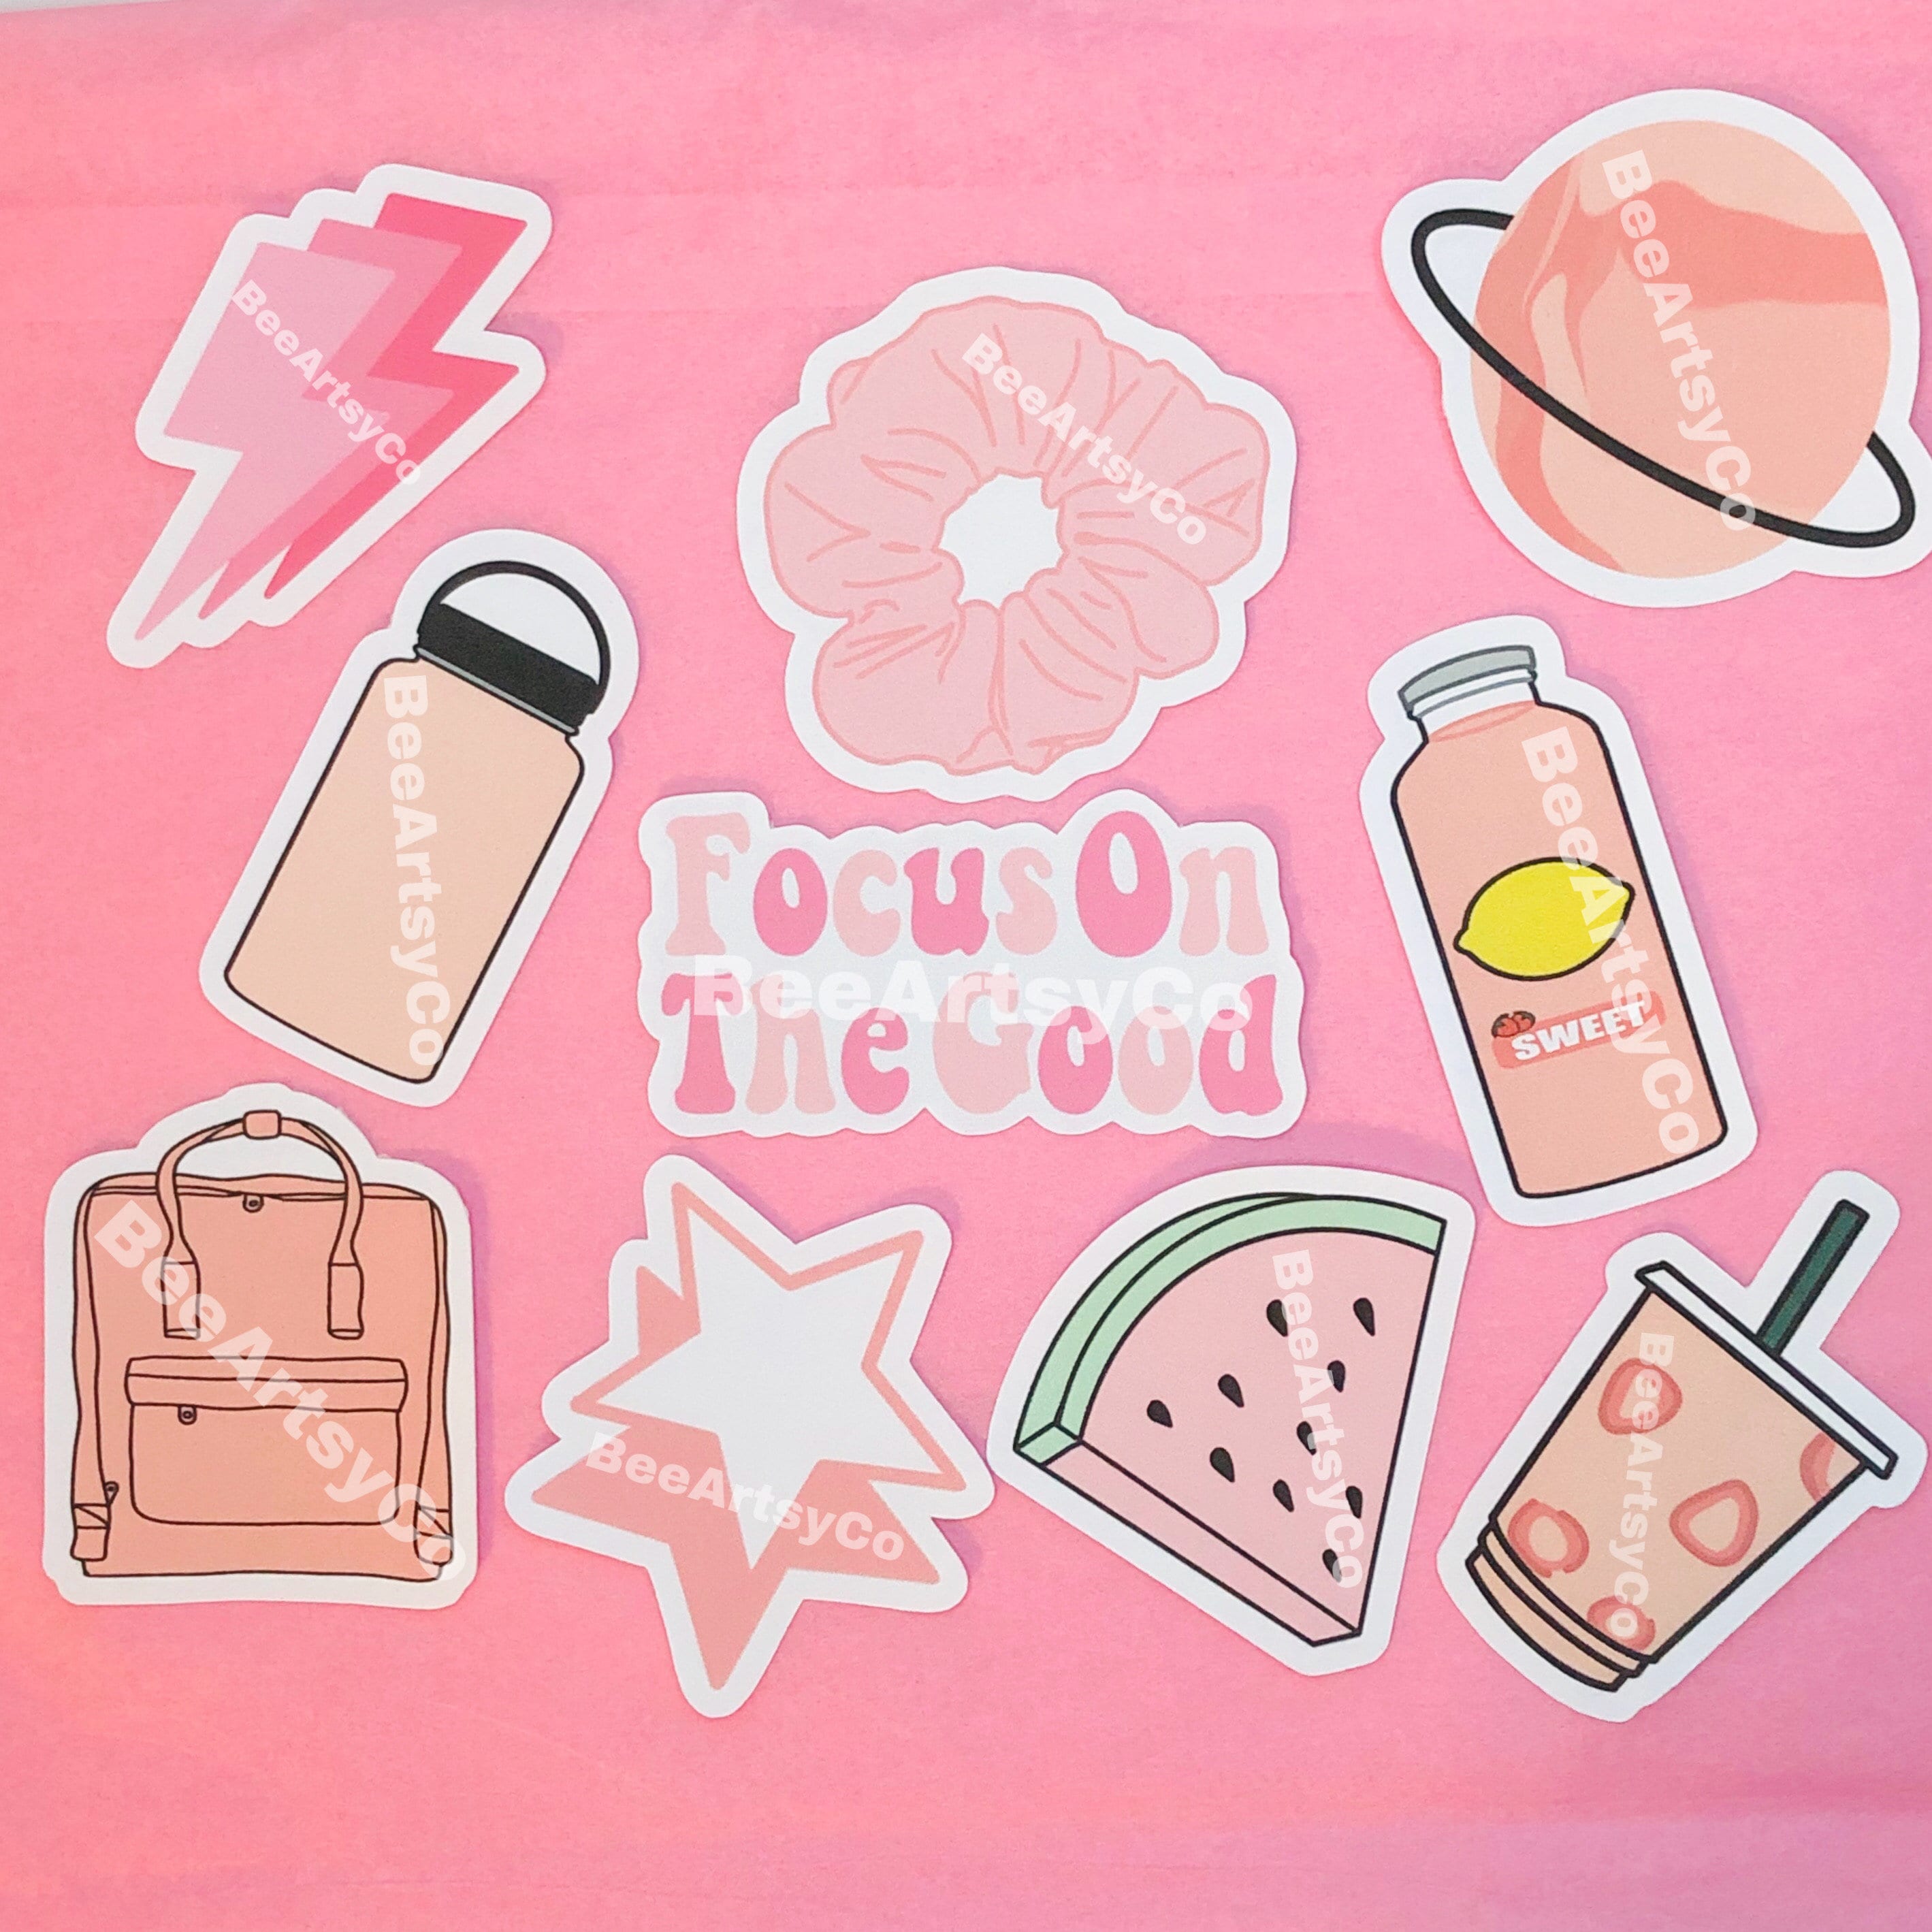 Pink Aesthetic Stickers Discount Clearance Save Jlcatj Gob Mx